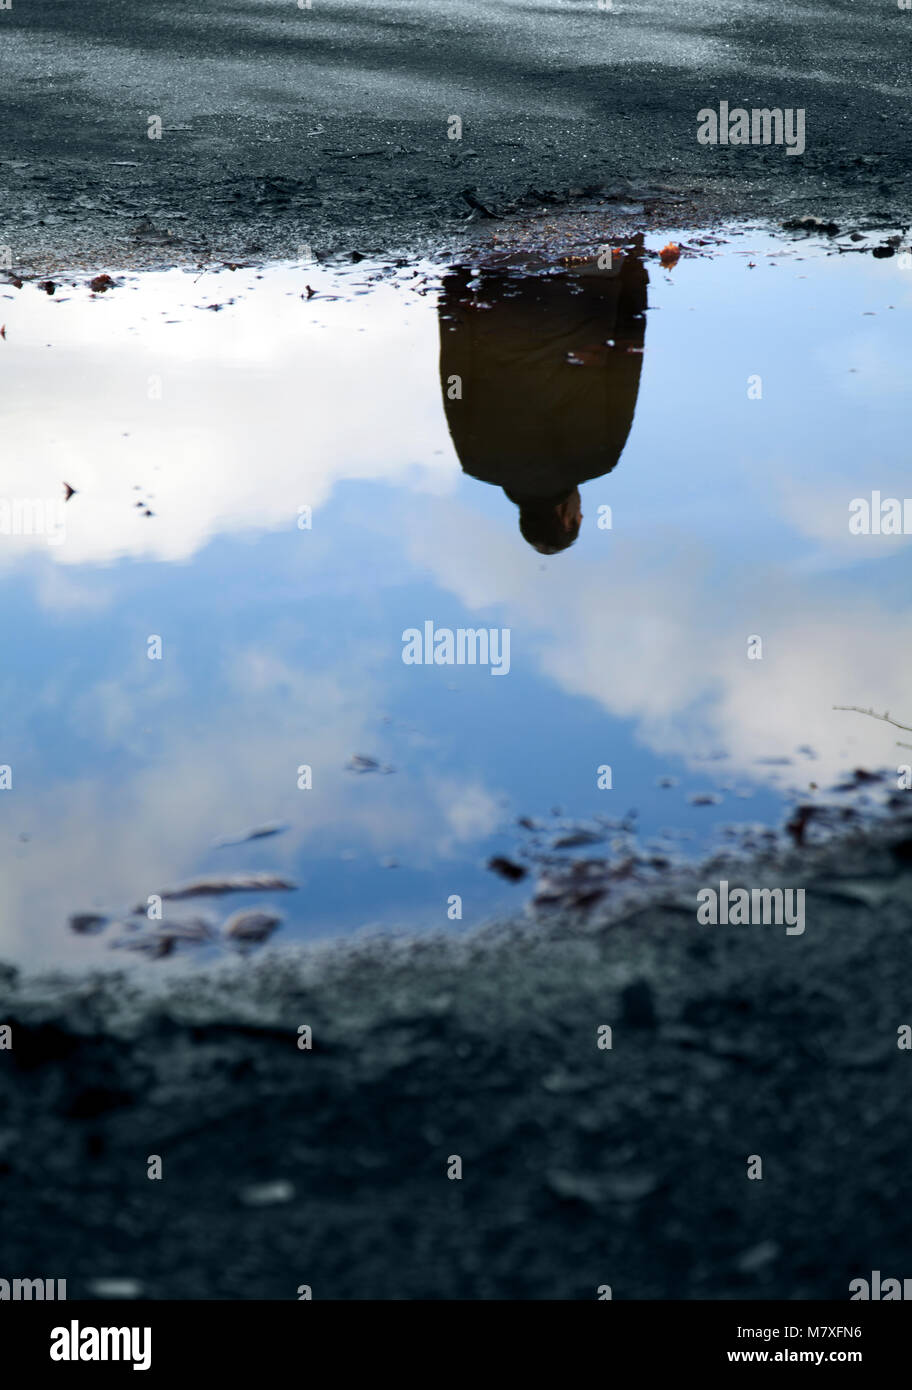 Man Reflection in Puddle Stock Photo